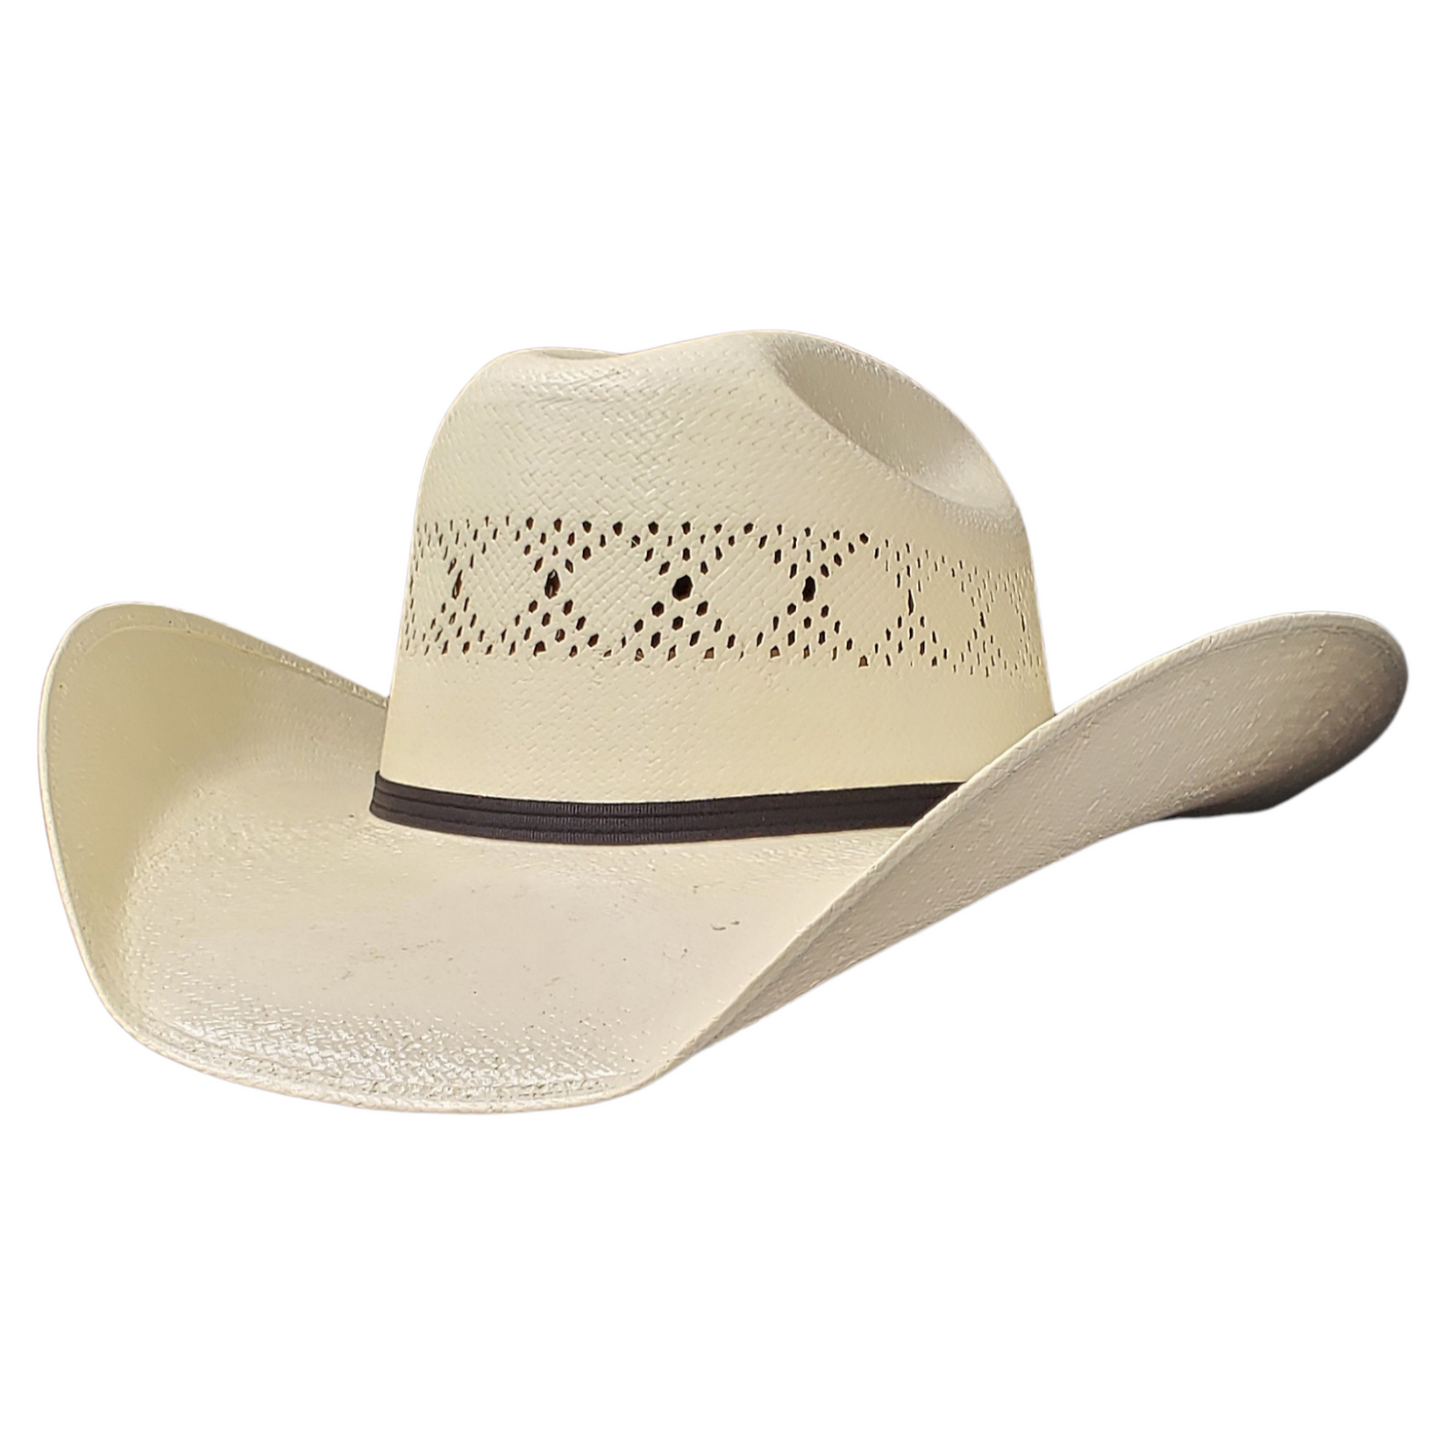 Gillette Ivory - Straw Shantung (Wyoming Series)